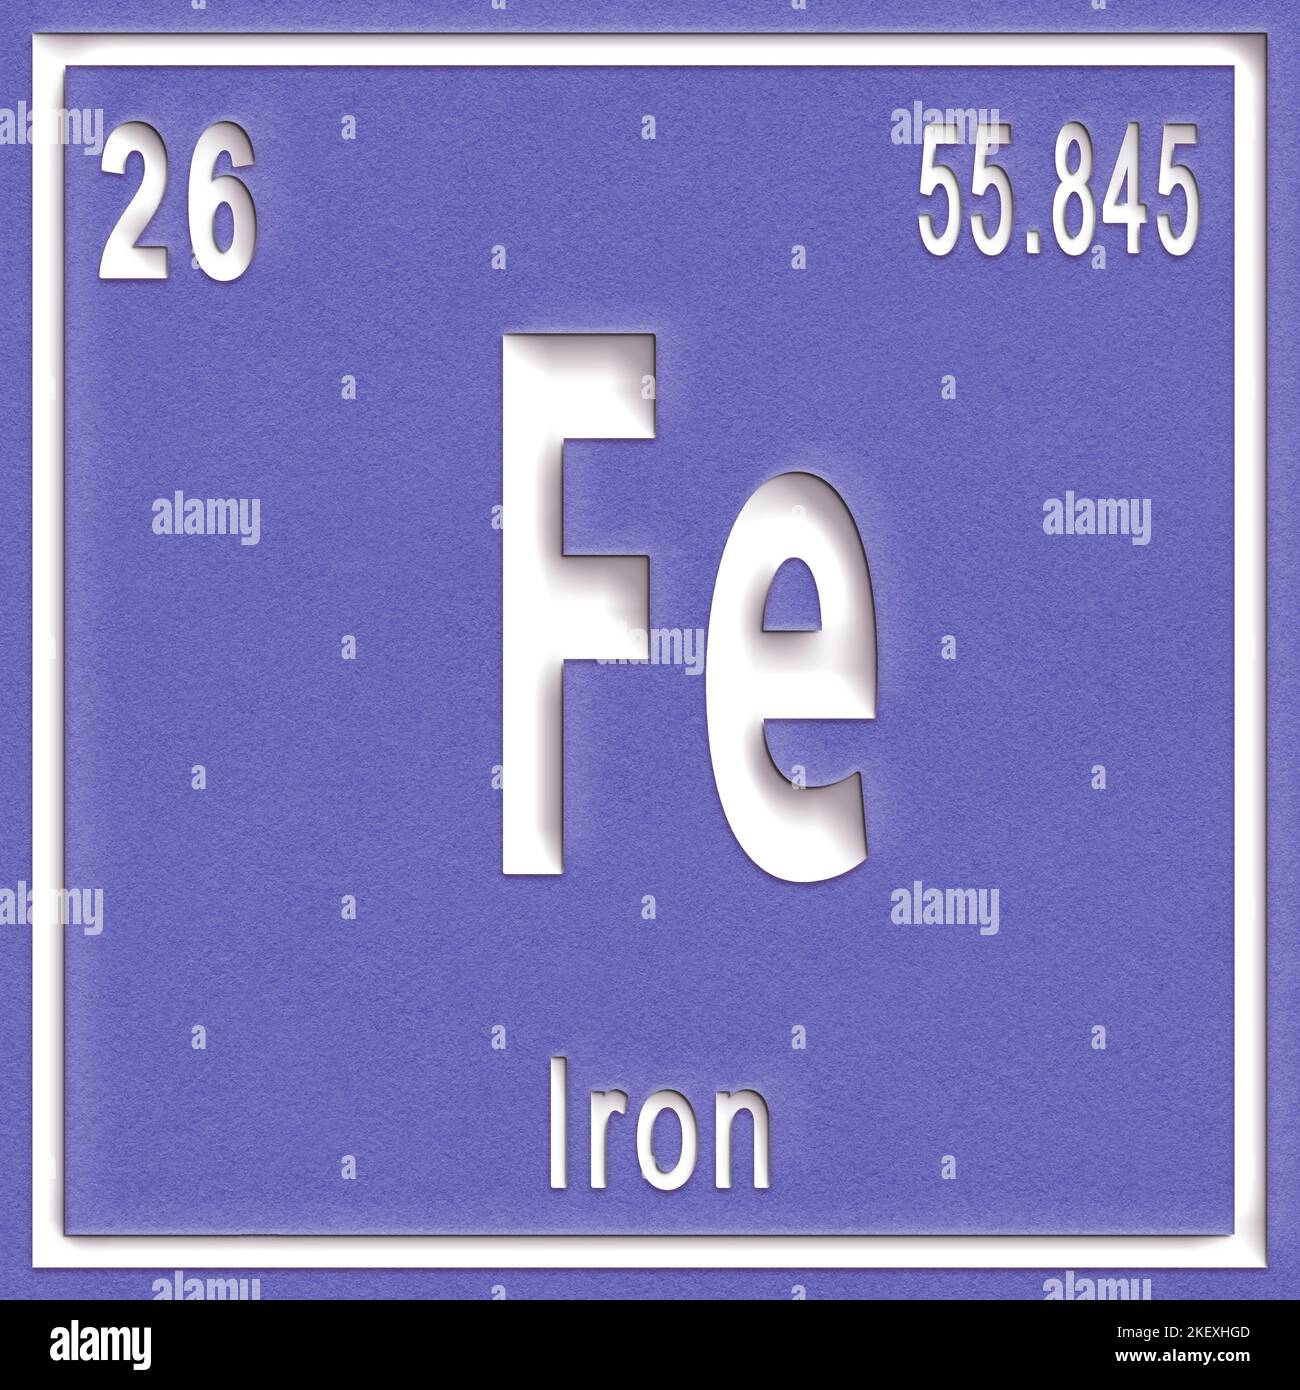 Iron Facts - Atomic Number 26 or Fe